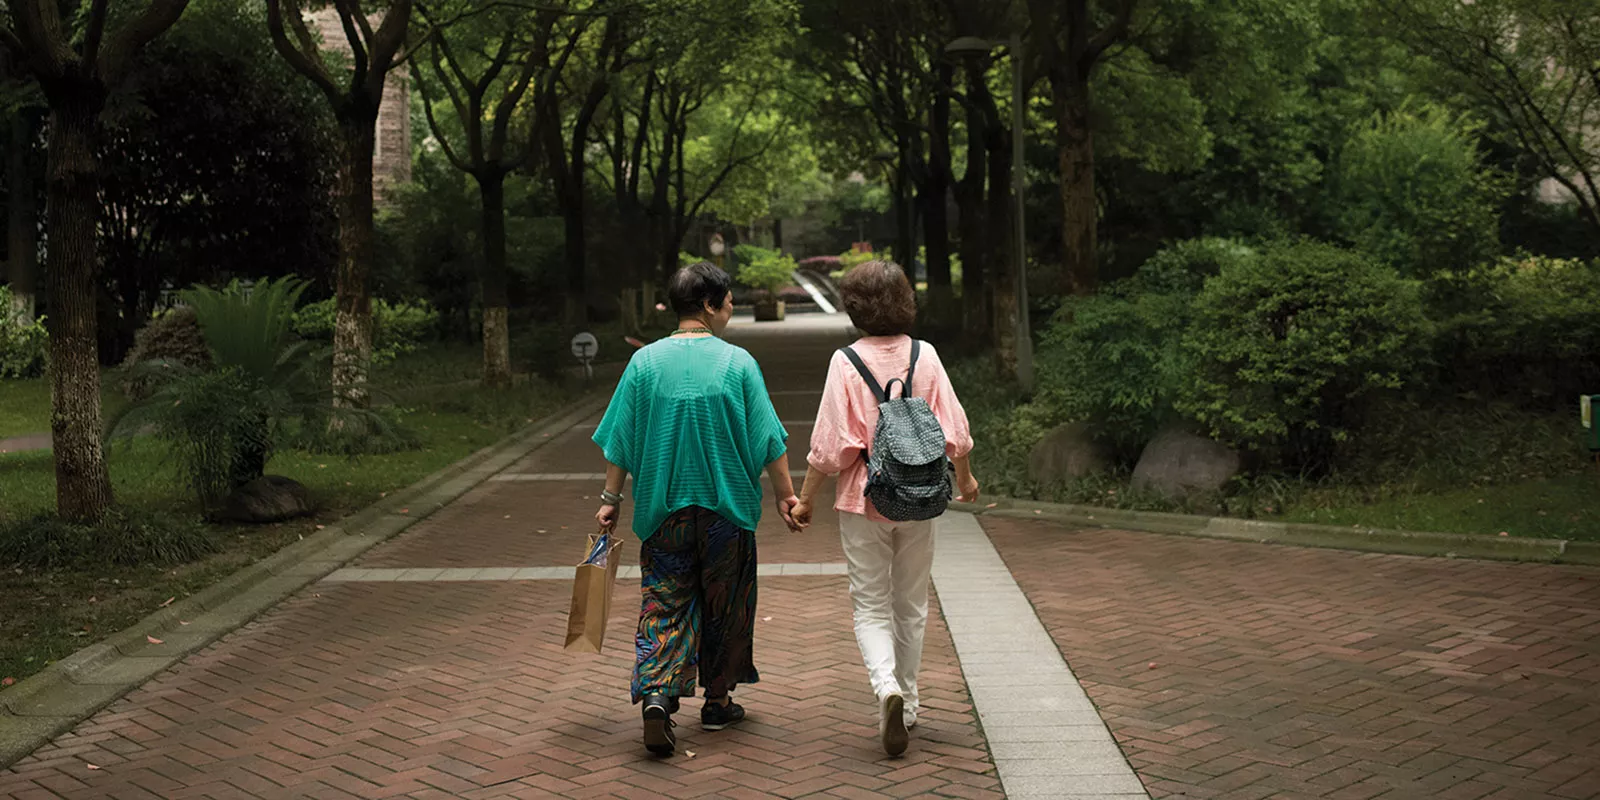 Women walking in the park holding hands